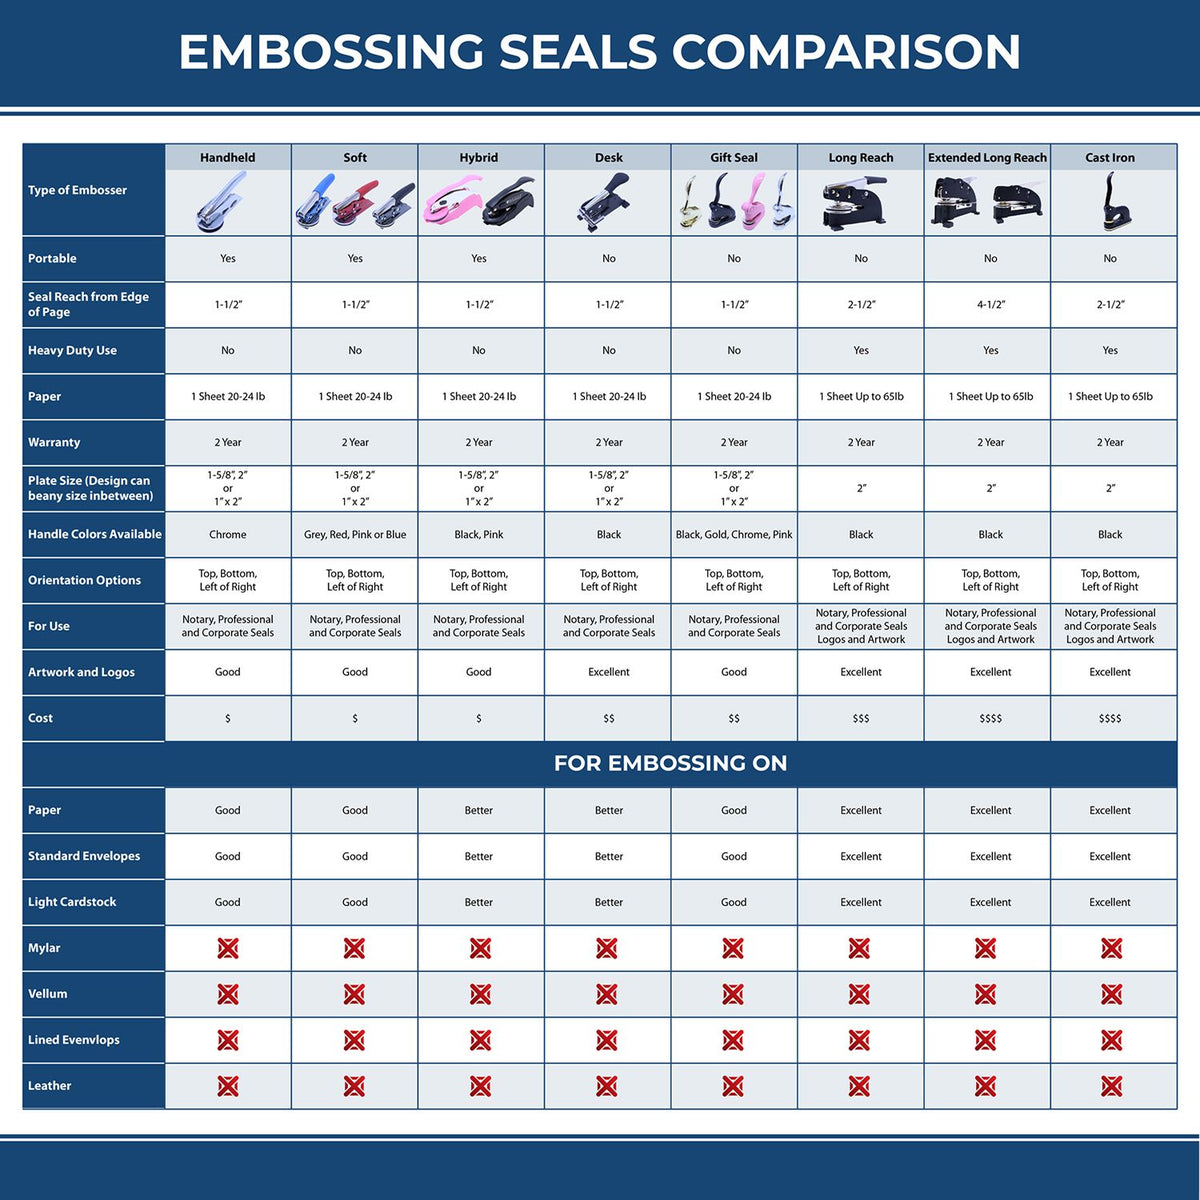 A comparison chart for the different types of mount models available for the Alabama Engineer Desk Seal.